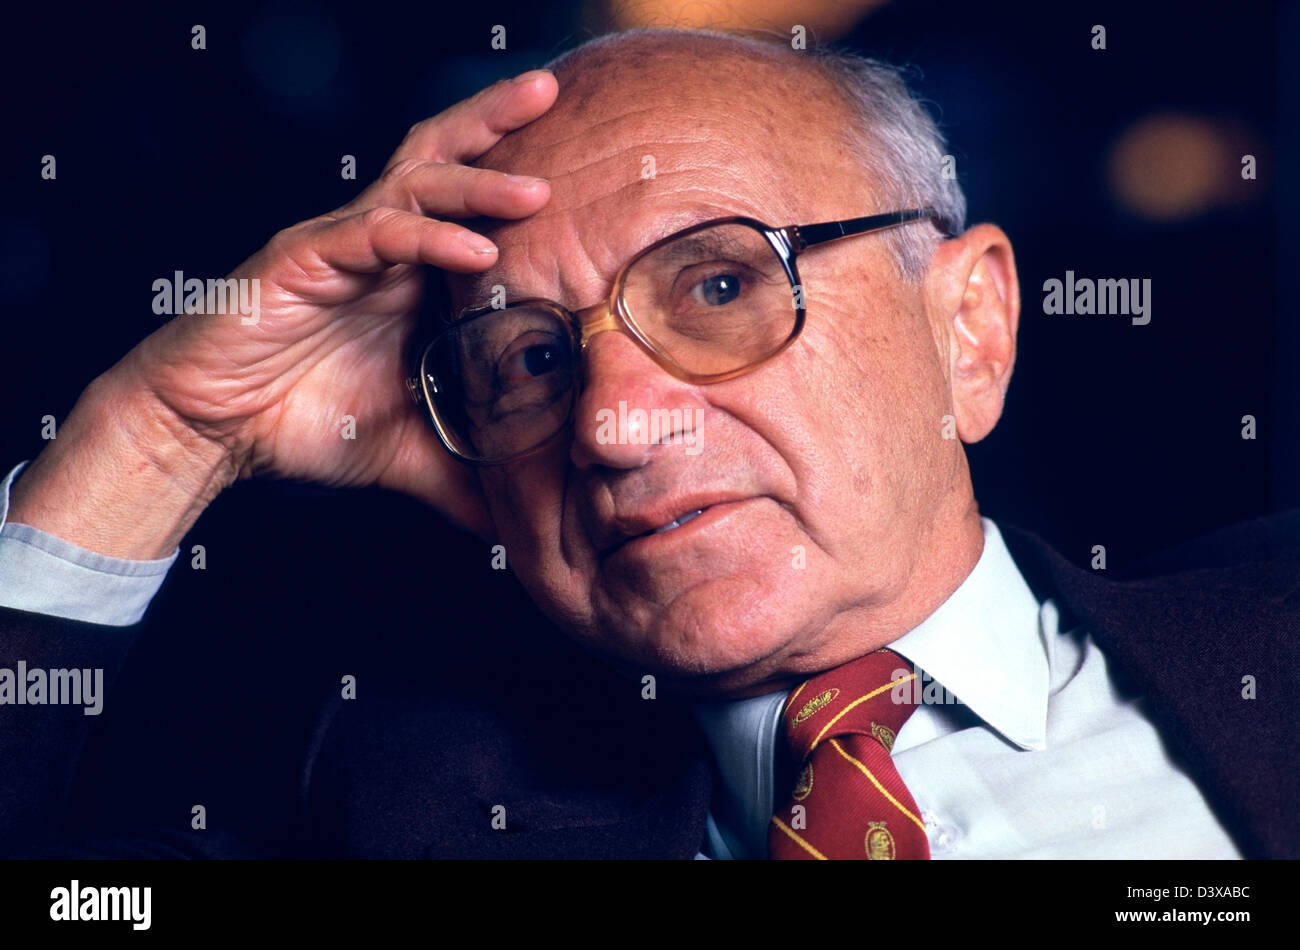 Milton Friedman (1912-2006) the 1976 American Nobel Laureate for Economic Sciences.  Photographed in San Francisco, CA, USA. Stock Photo